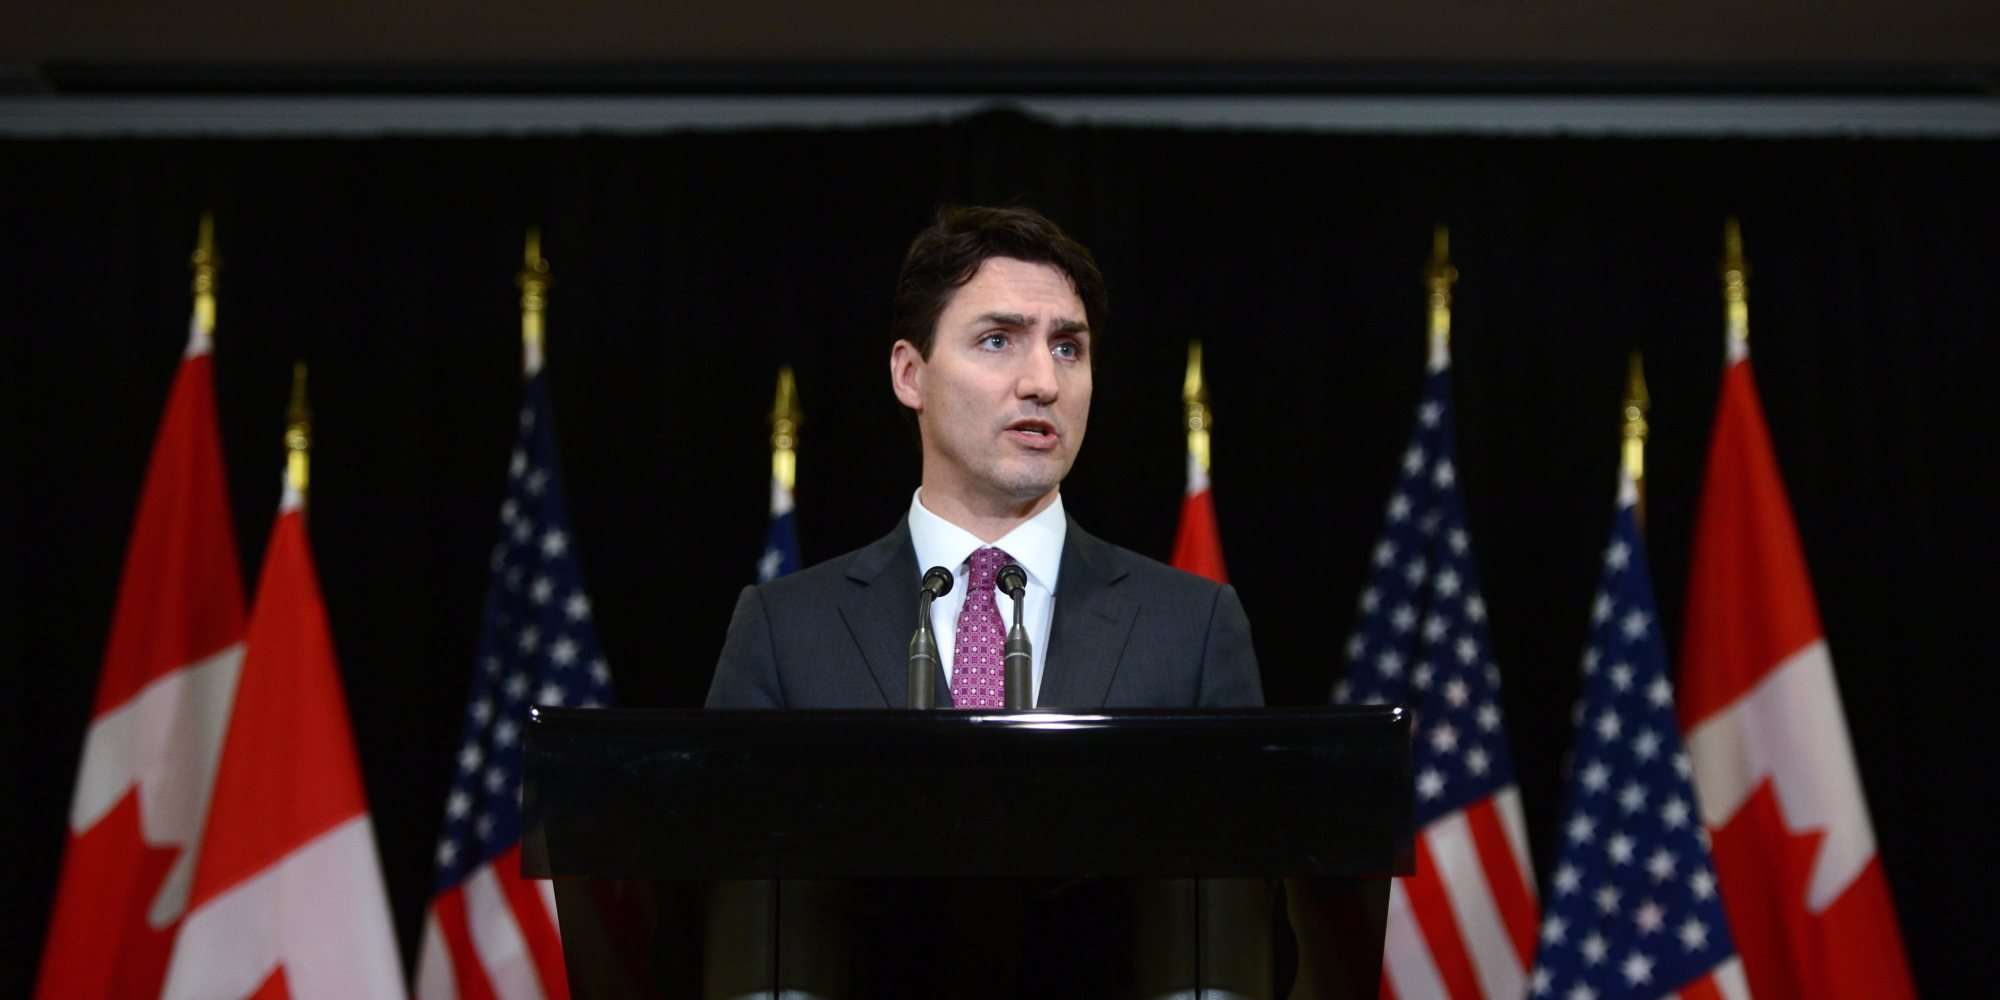 image for Justin Trudeau: Canada Fully Supports U.S.'s 'Focused Action' In Syria